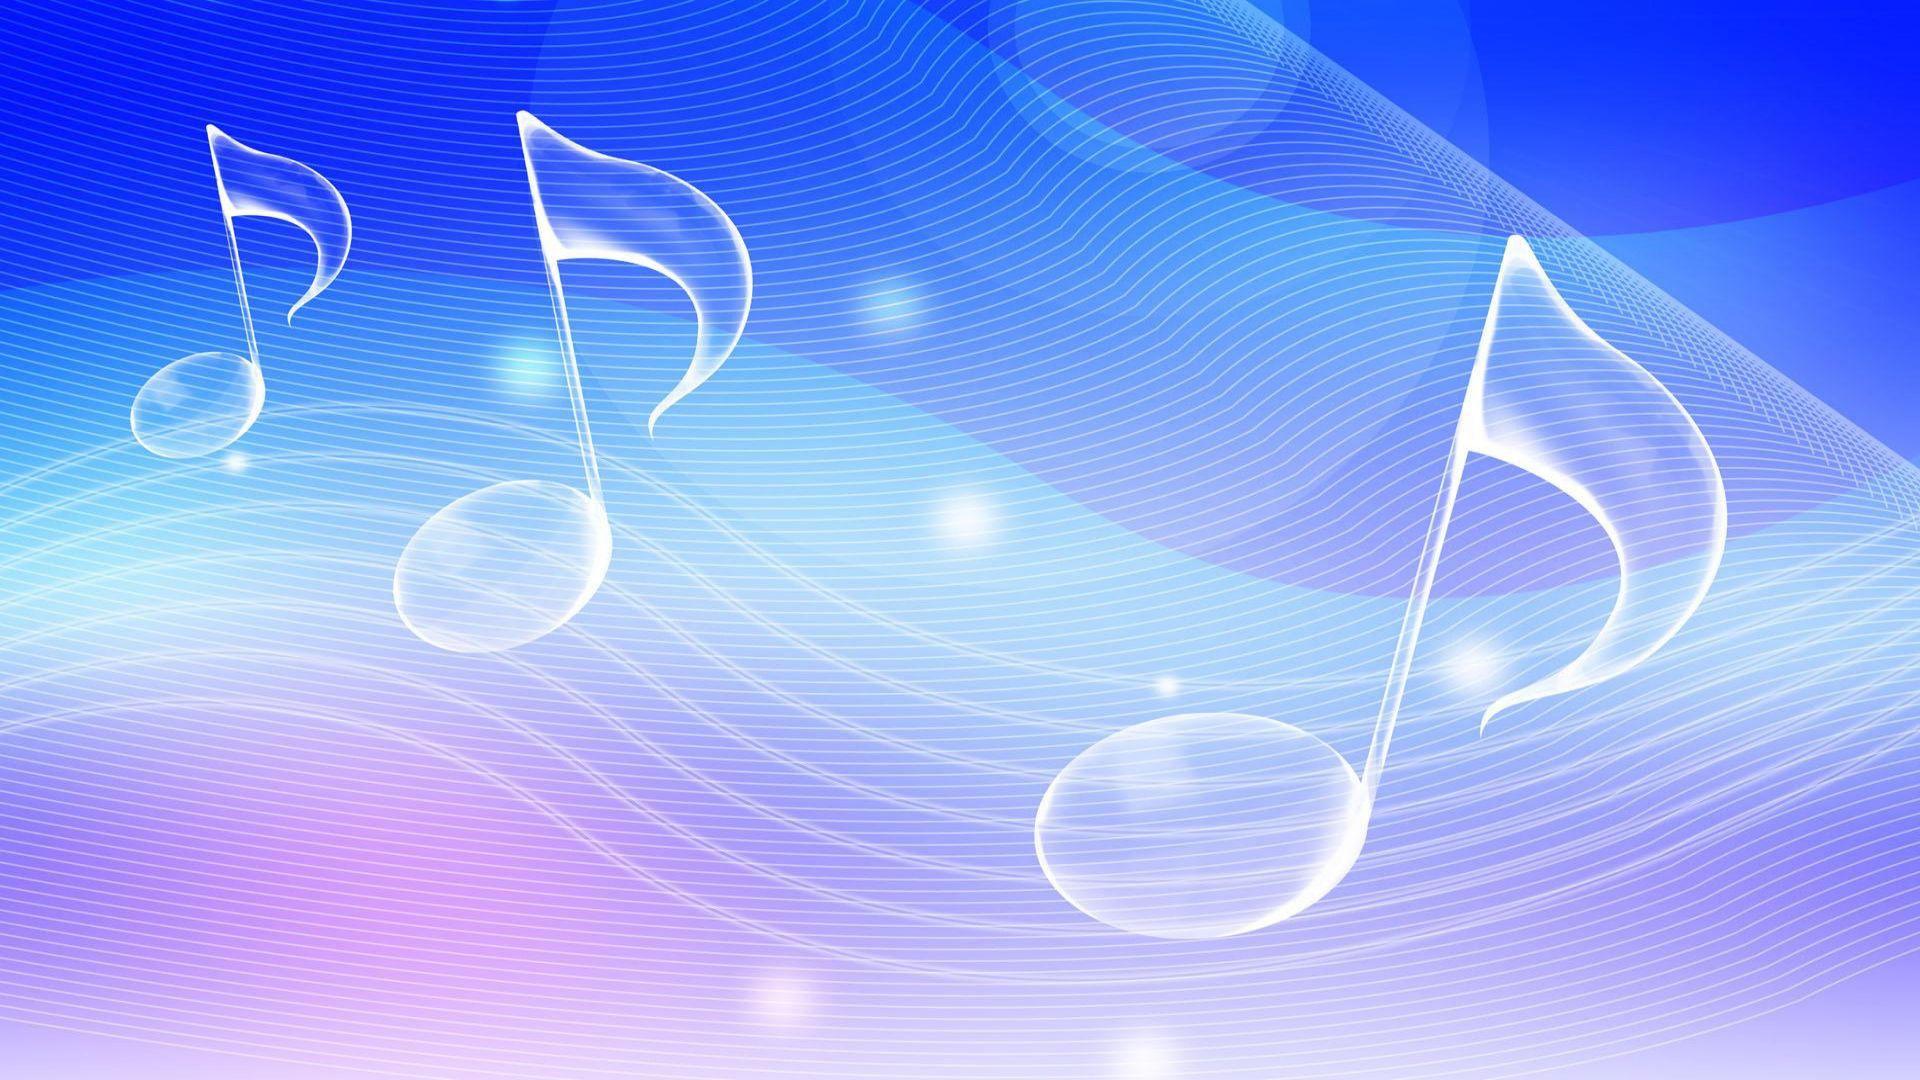 Free 1920x1080 Music Notes Blue Waves Wallpaper Full HD 1080p